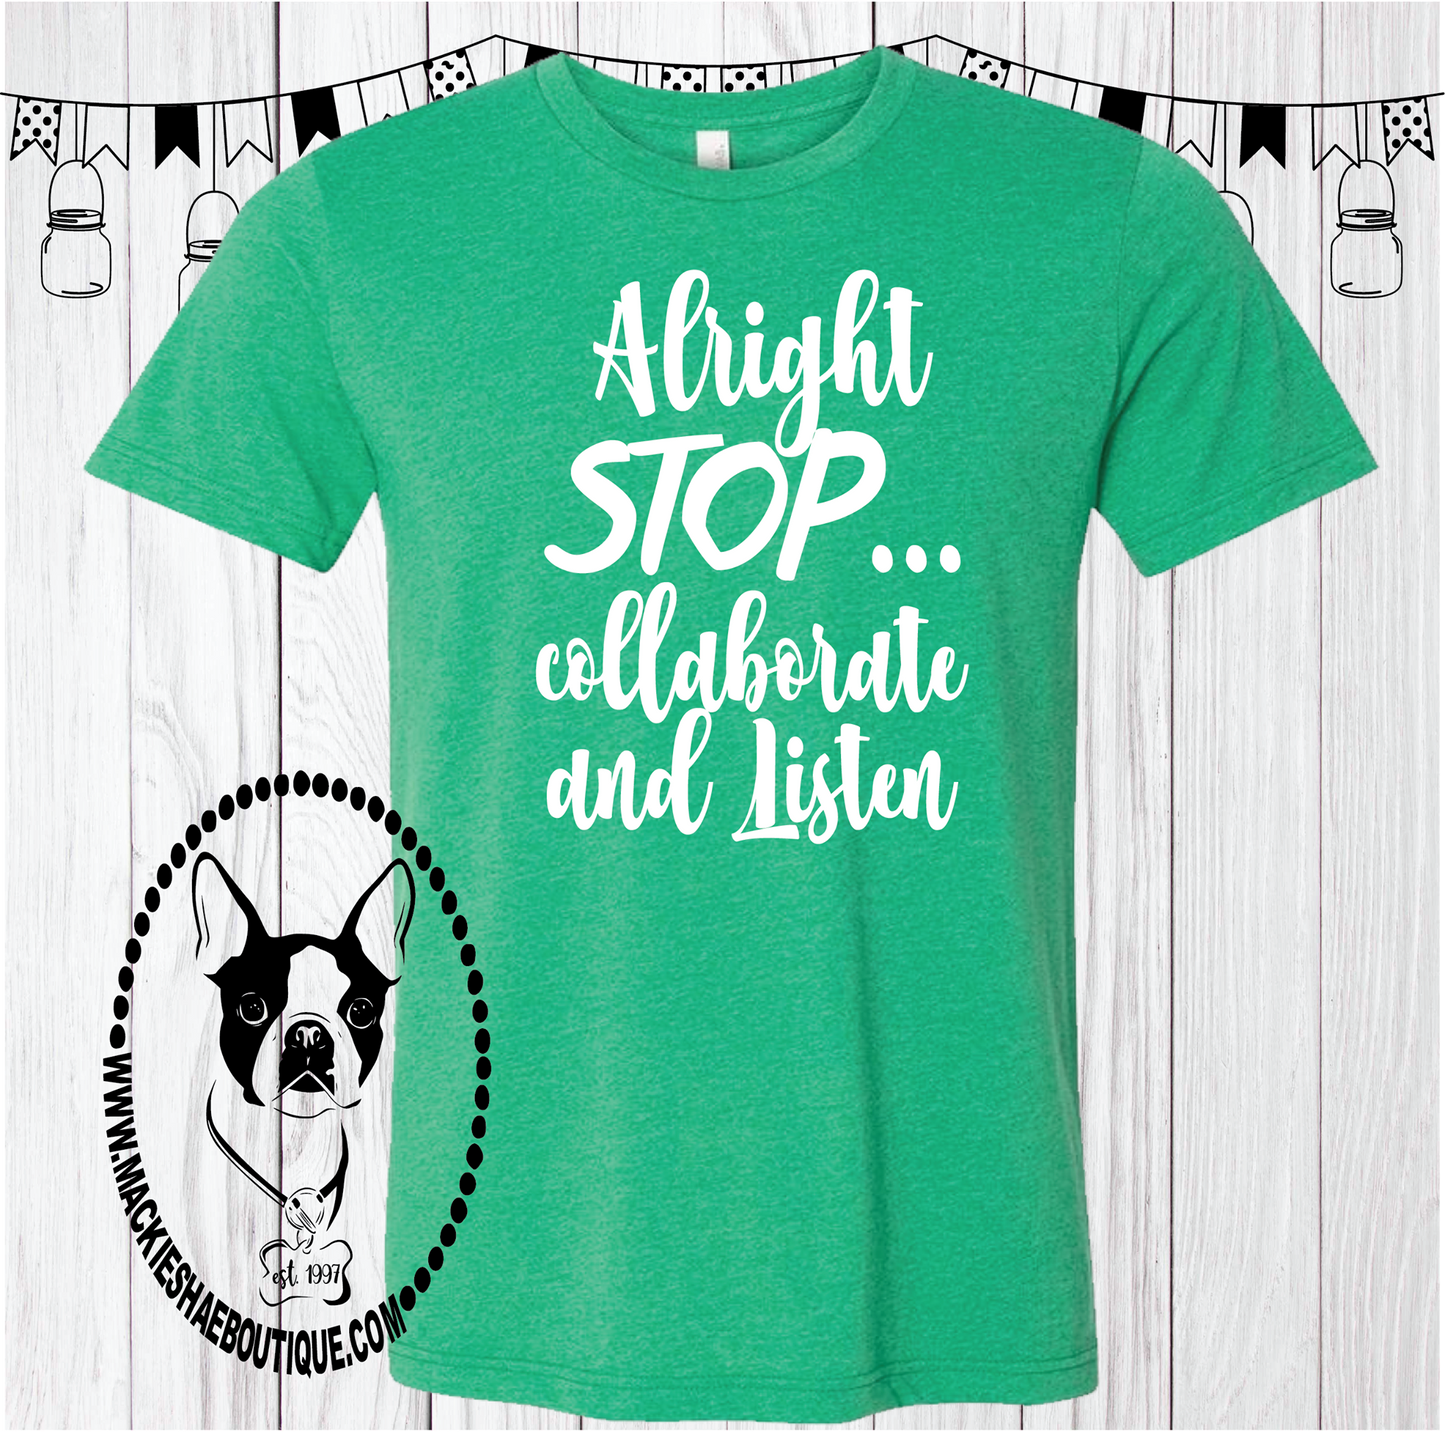 Alright STOP... Collaborate and Listen Custom Shirt, Short Sleeve